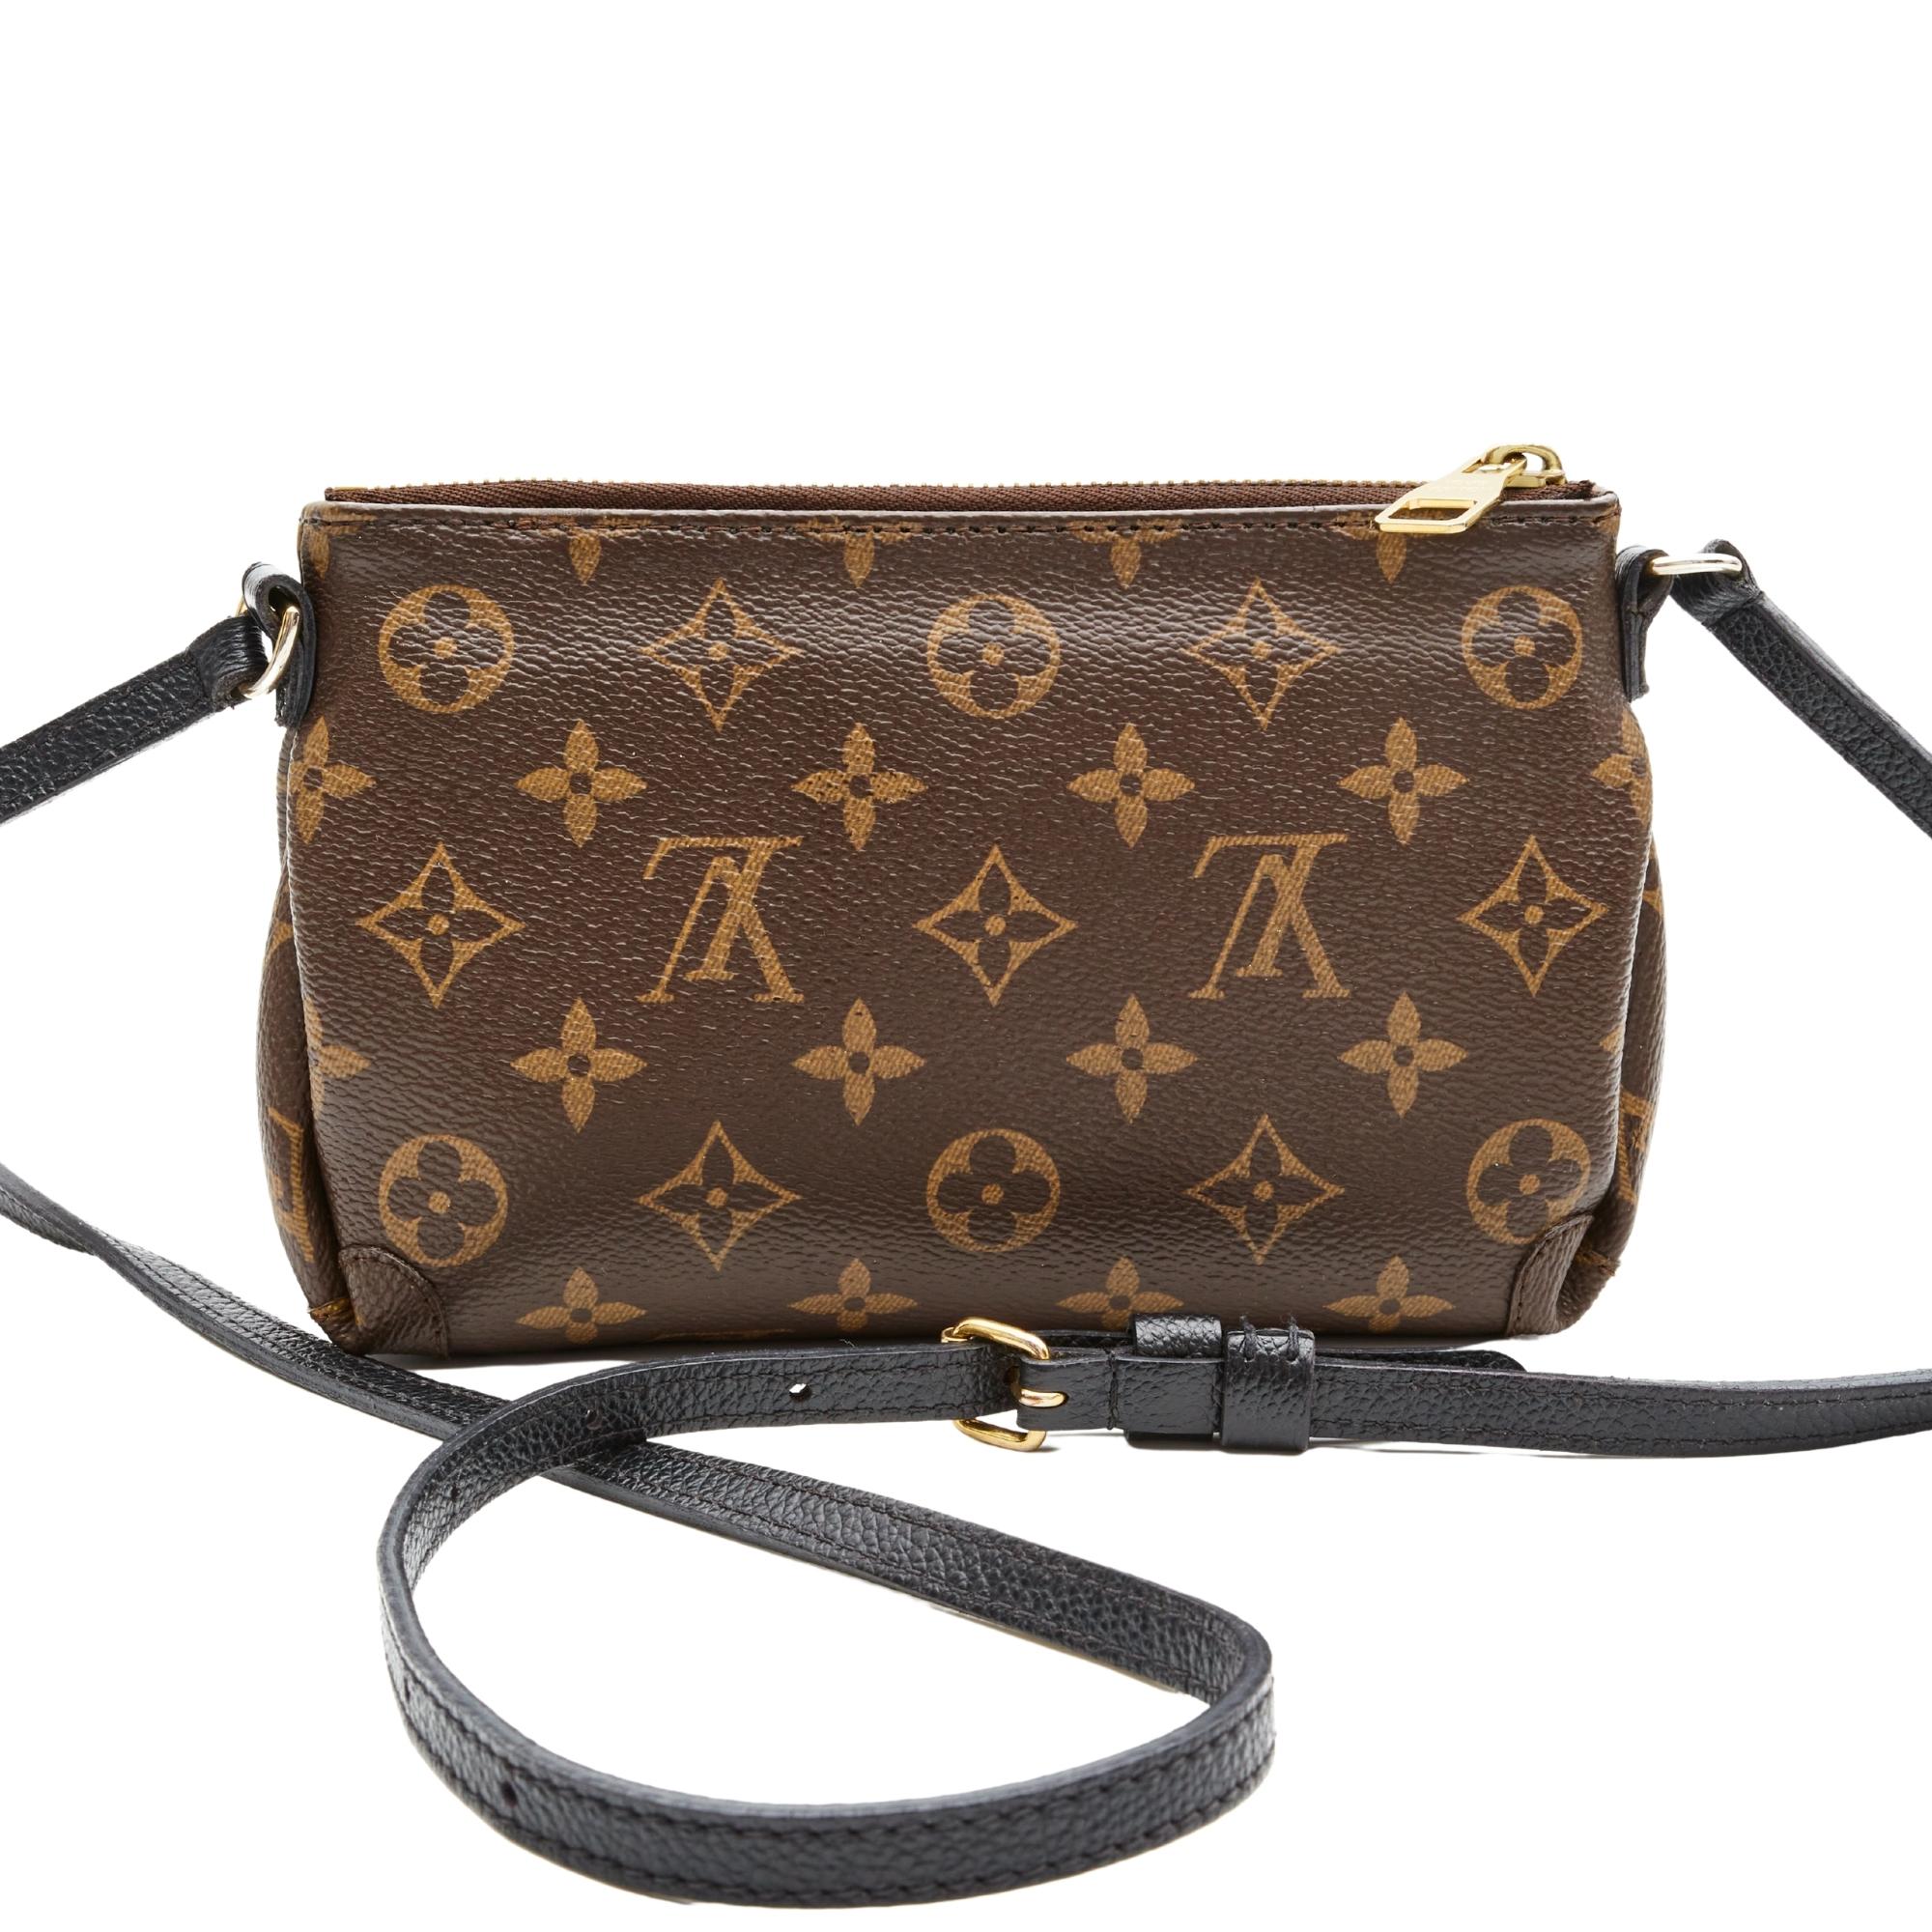 This uniform bag can be seen on sale assistants in LV stores and is made with brown monogram coated canvas. The bag features black leather finishes, gold-tone hardware, top zip closure and brown woven fabric interior lining with a large slip